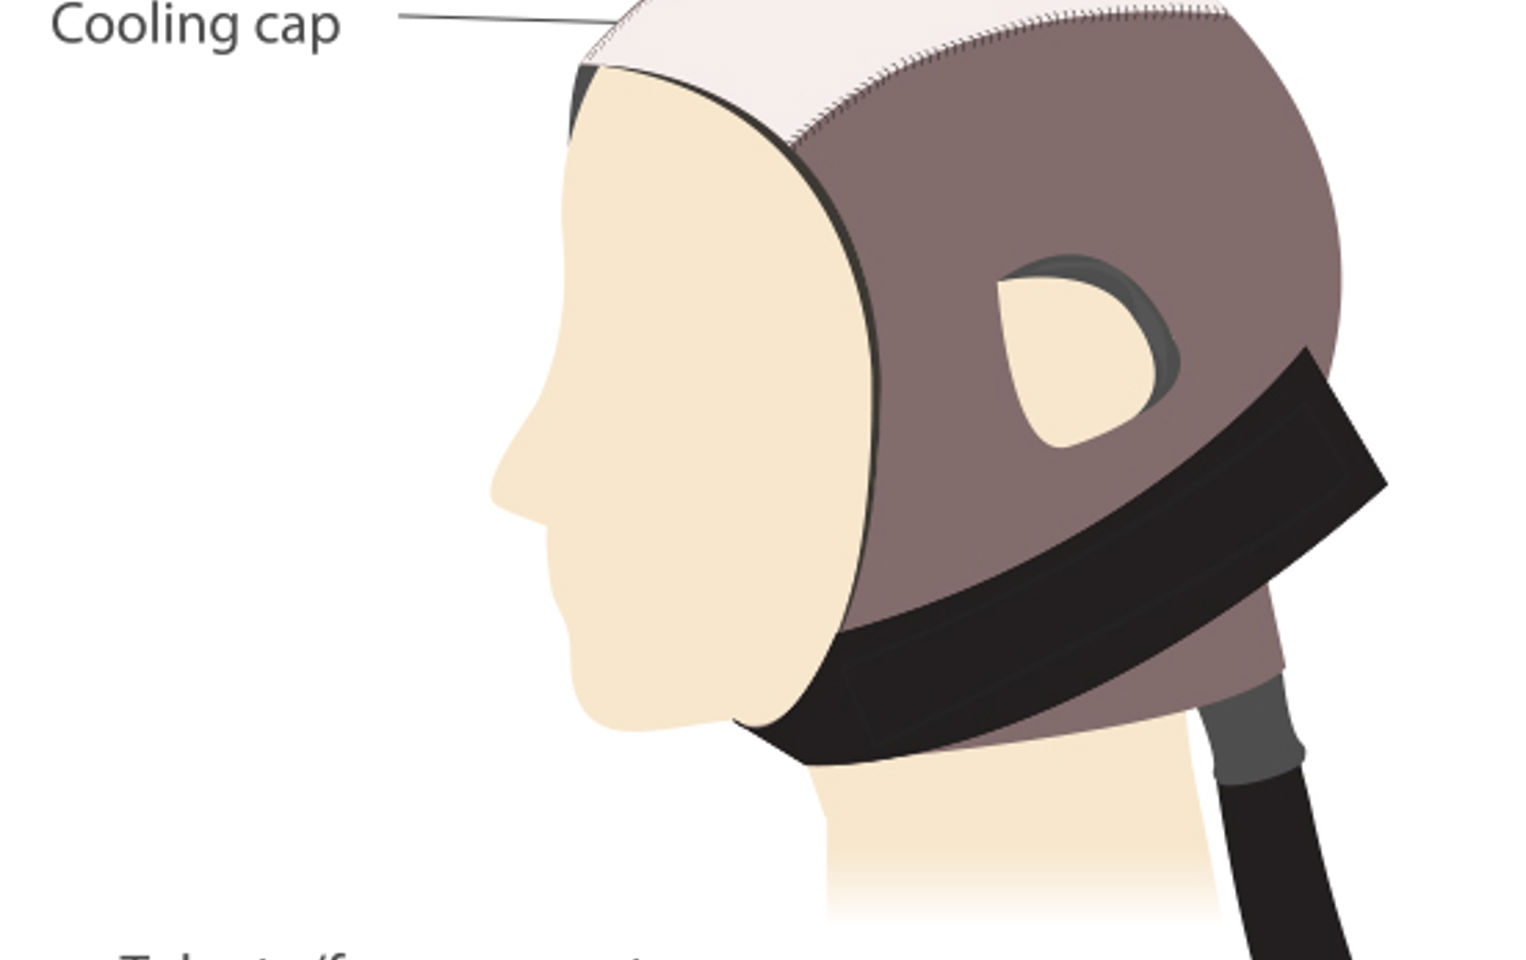 Image of a scalp cooling cap